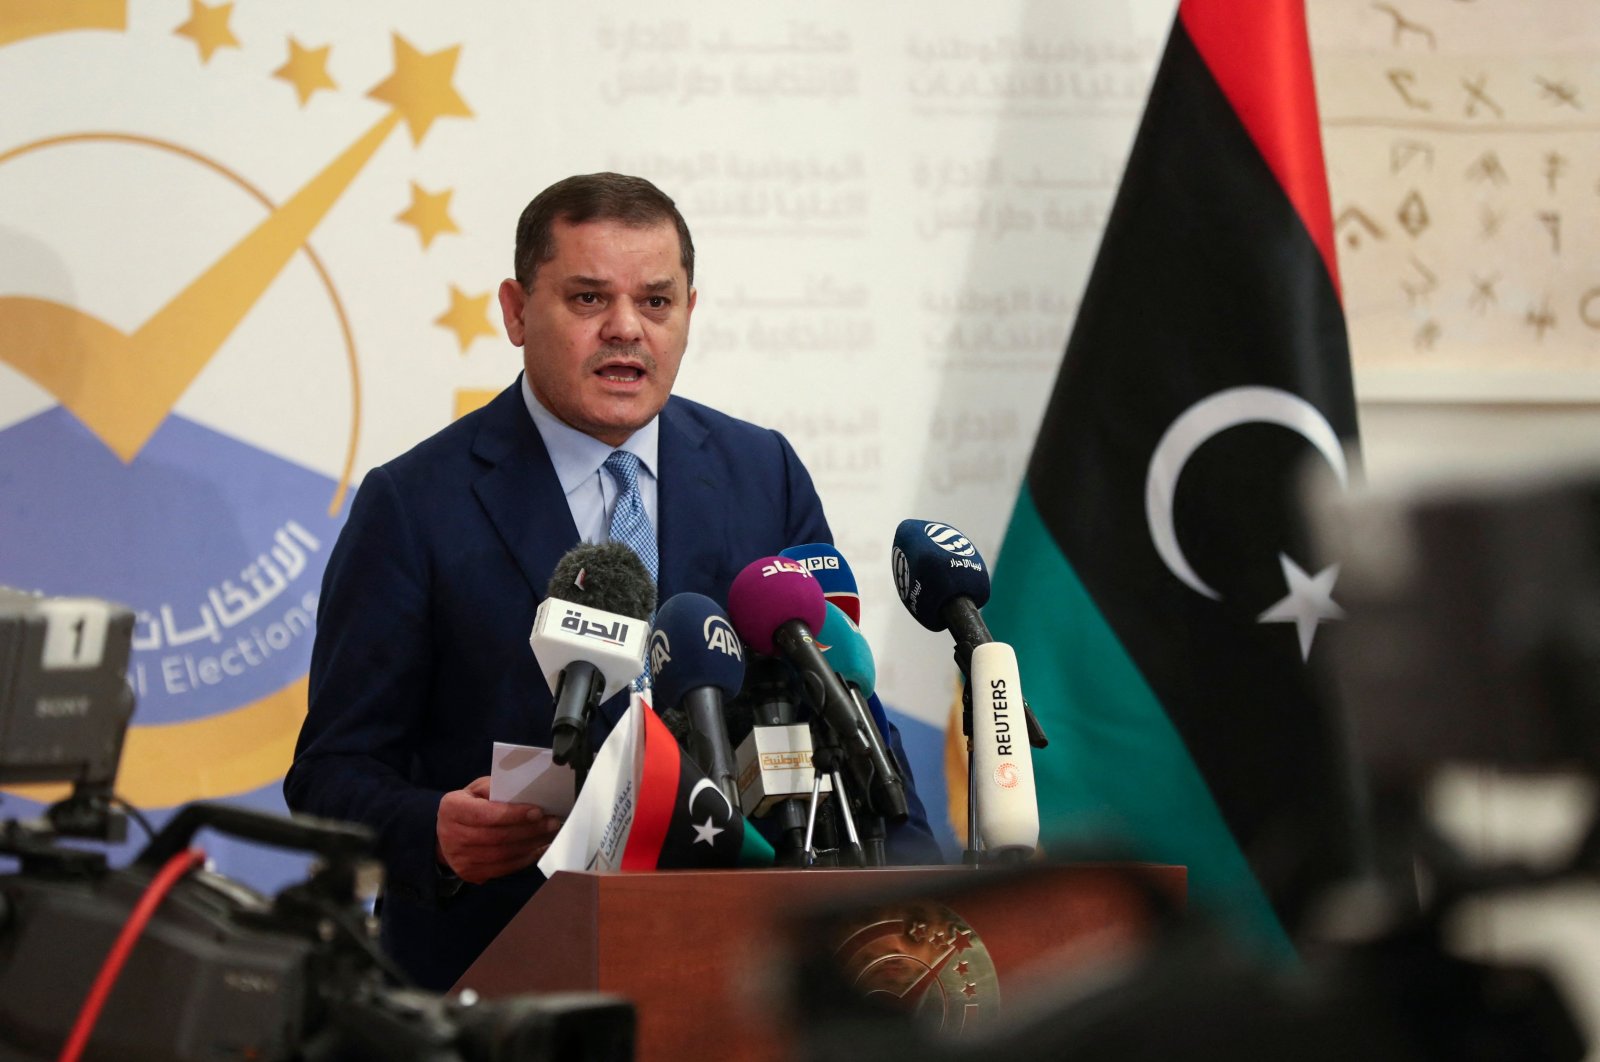 Libya&#039;s interim Prime Minister Abdulhamid Dbeibah speaks after registering his candidacy for next month&#039;s presidential election in the capital Tripoli, Libya, on Nov. 21, 2021. (AFP Photo)